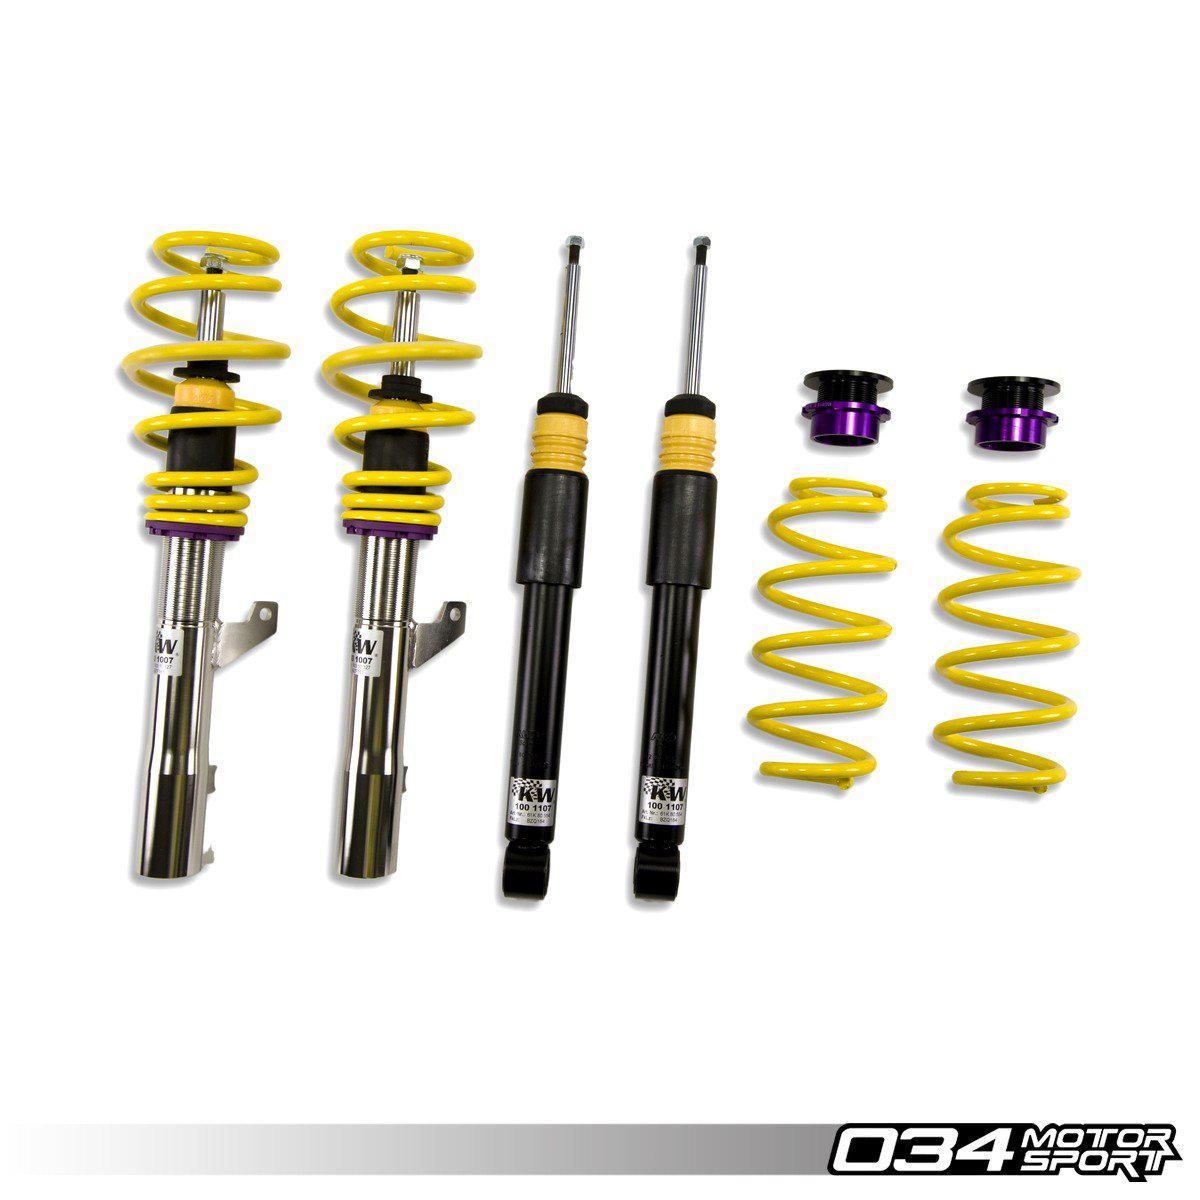 KW Variant 2 Coilover Suspension, MKIV Volkswagen Golf/GTI FWD-A Little Tuning Co